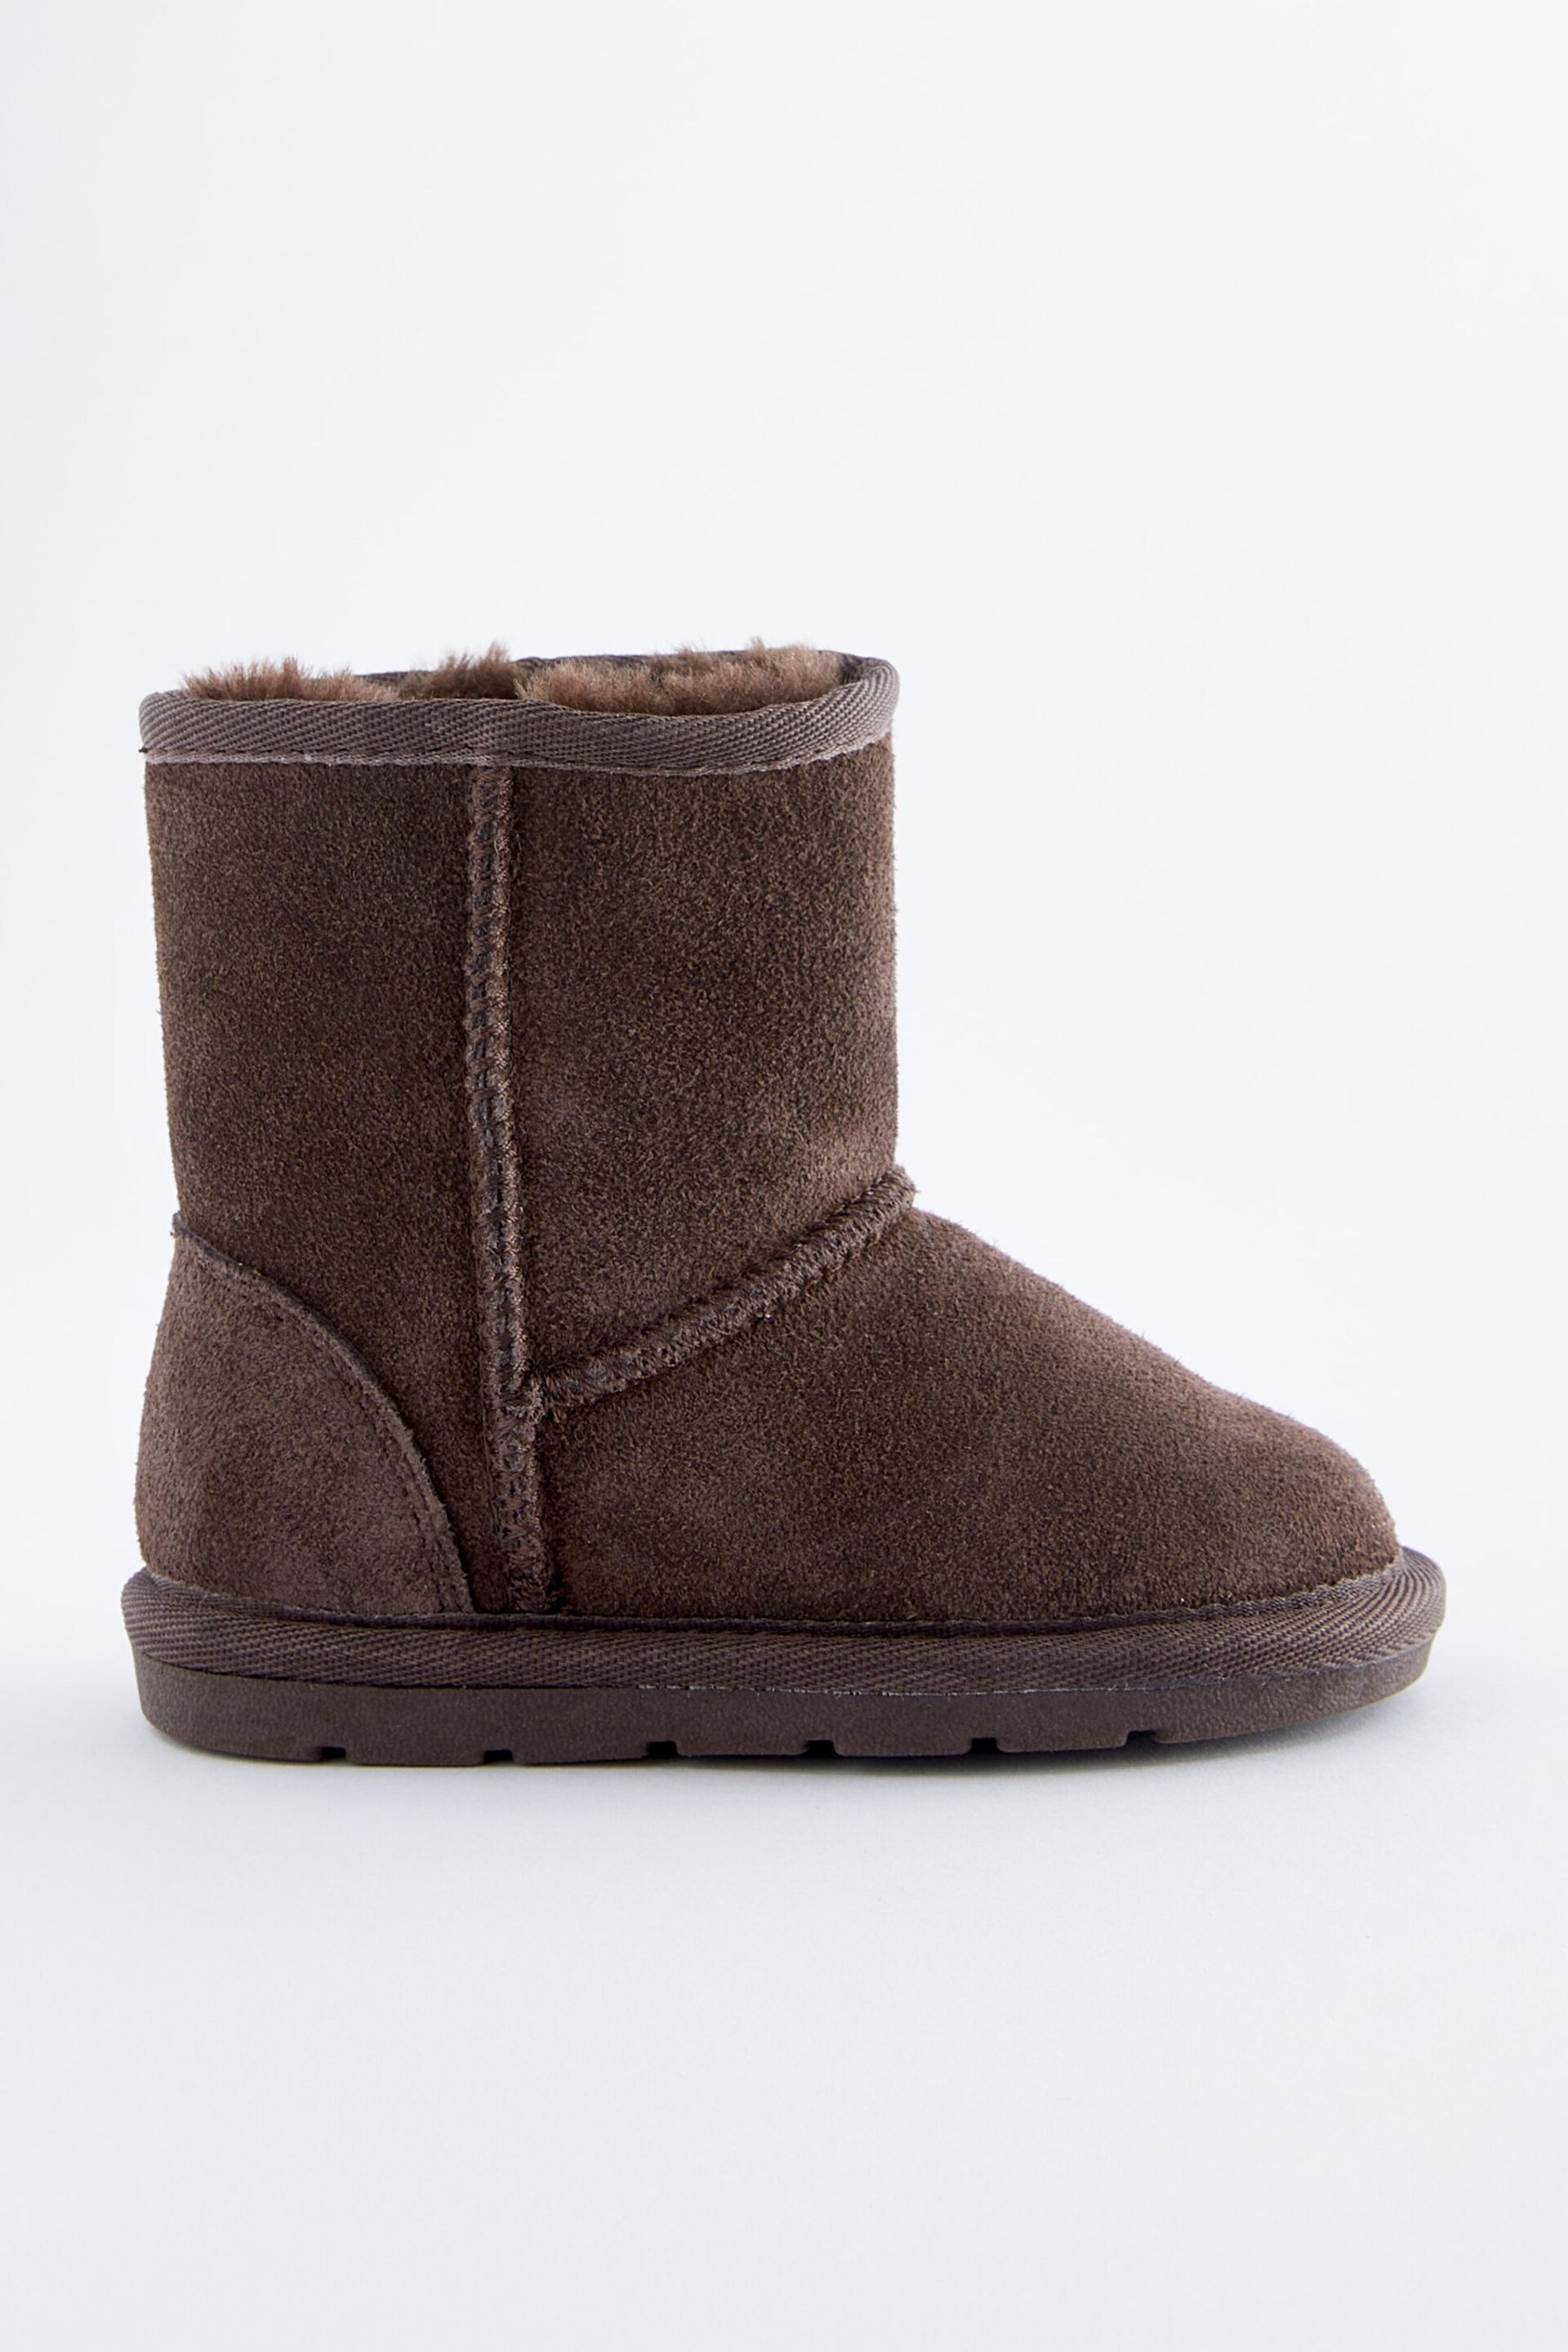 Chocolate Brown Short Suede Tall Faux Fur Lined Water Repellent Pull-On Suede Boots - Image 2 of 5